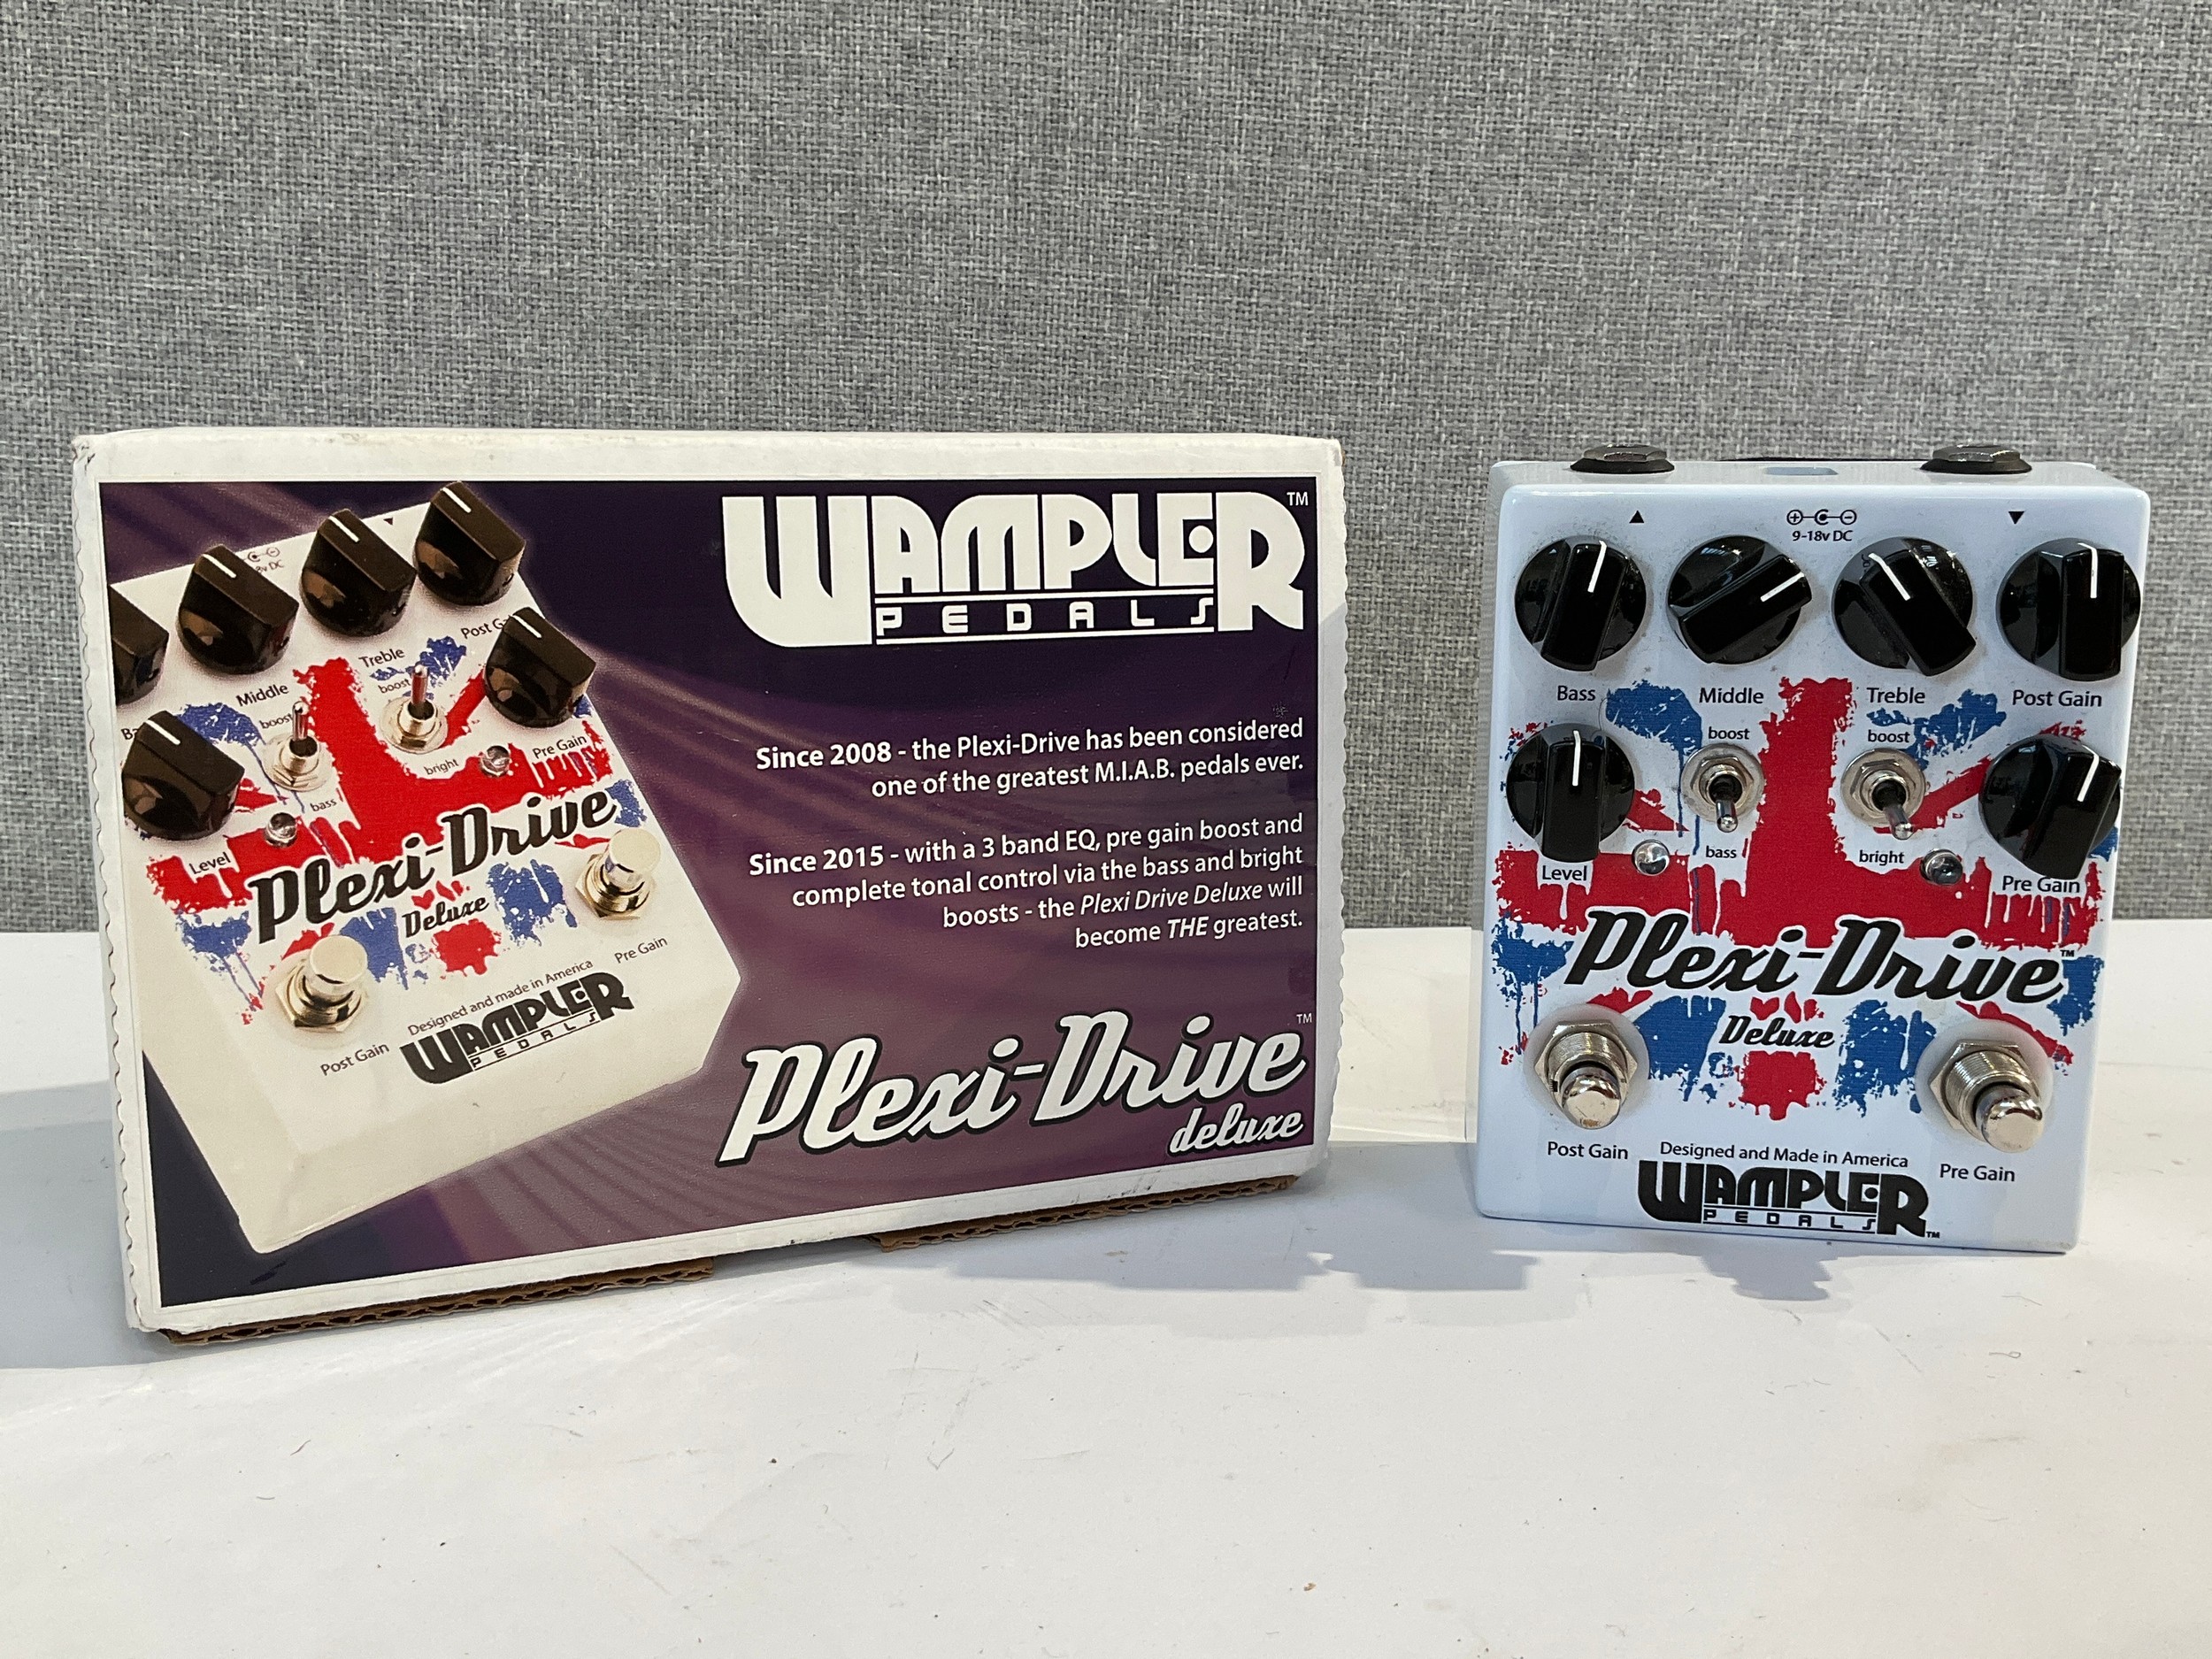 A Wampler Plexi Drive Deluxe Overdrive guitar effects pedal, boxed